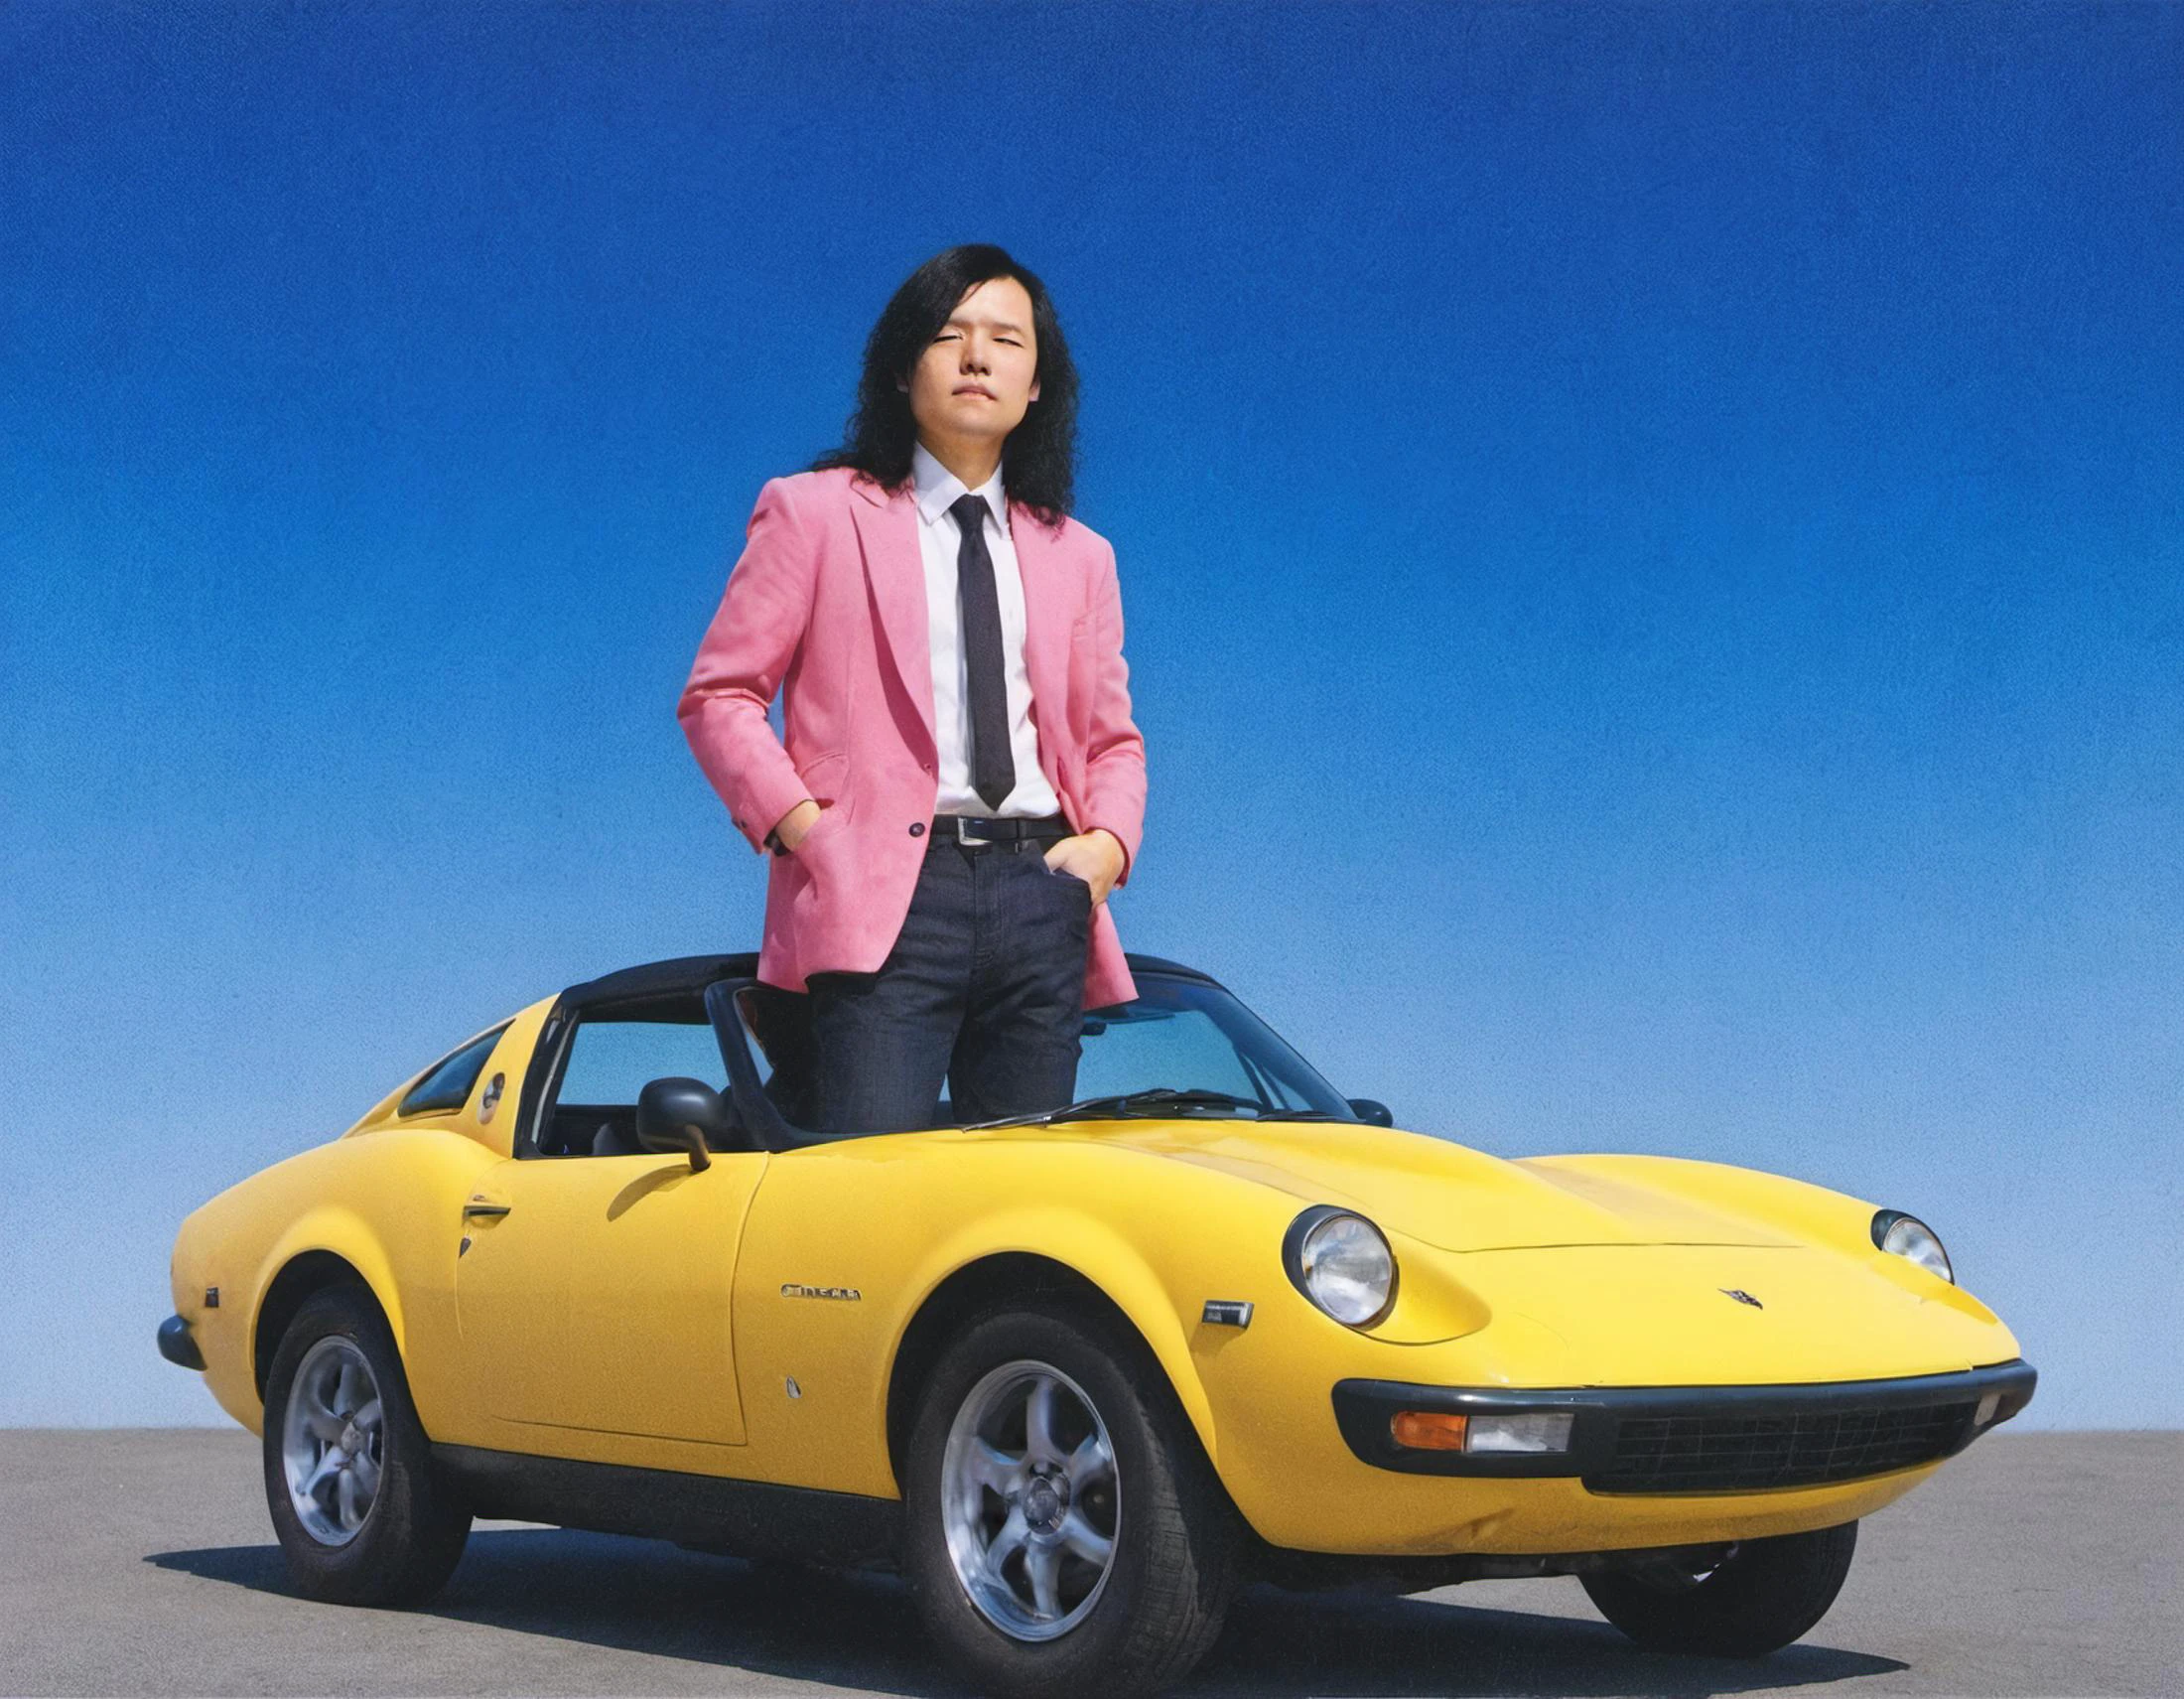 sunny day, awesome cool motorized young man in a blazer torso grafted to the top of a sports car, gradient, insane, Tatsuro approved,  